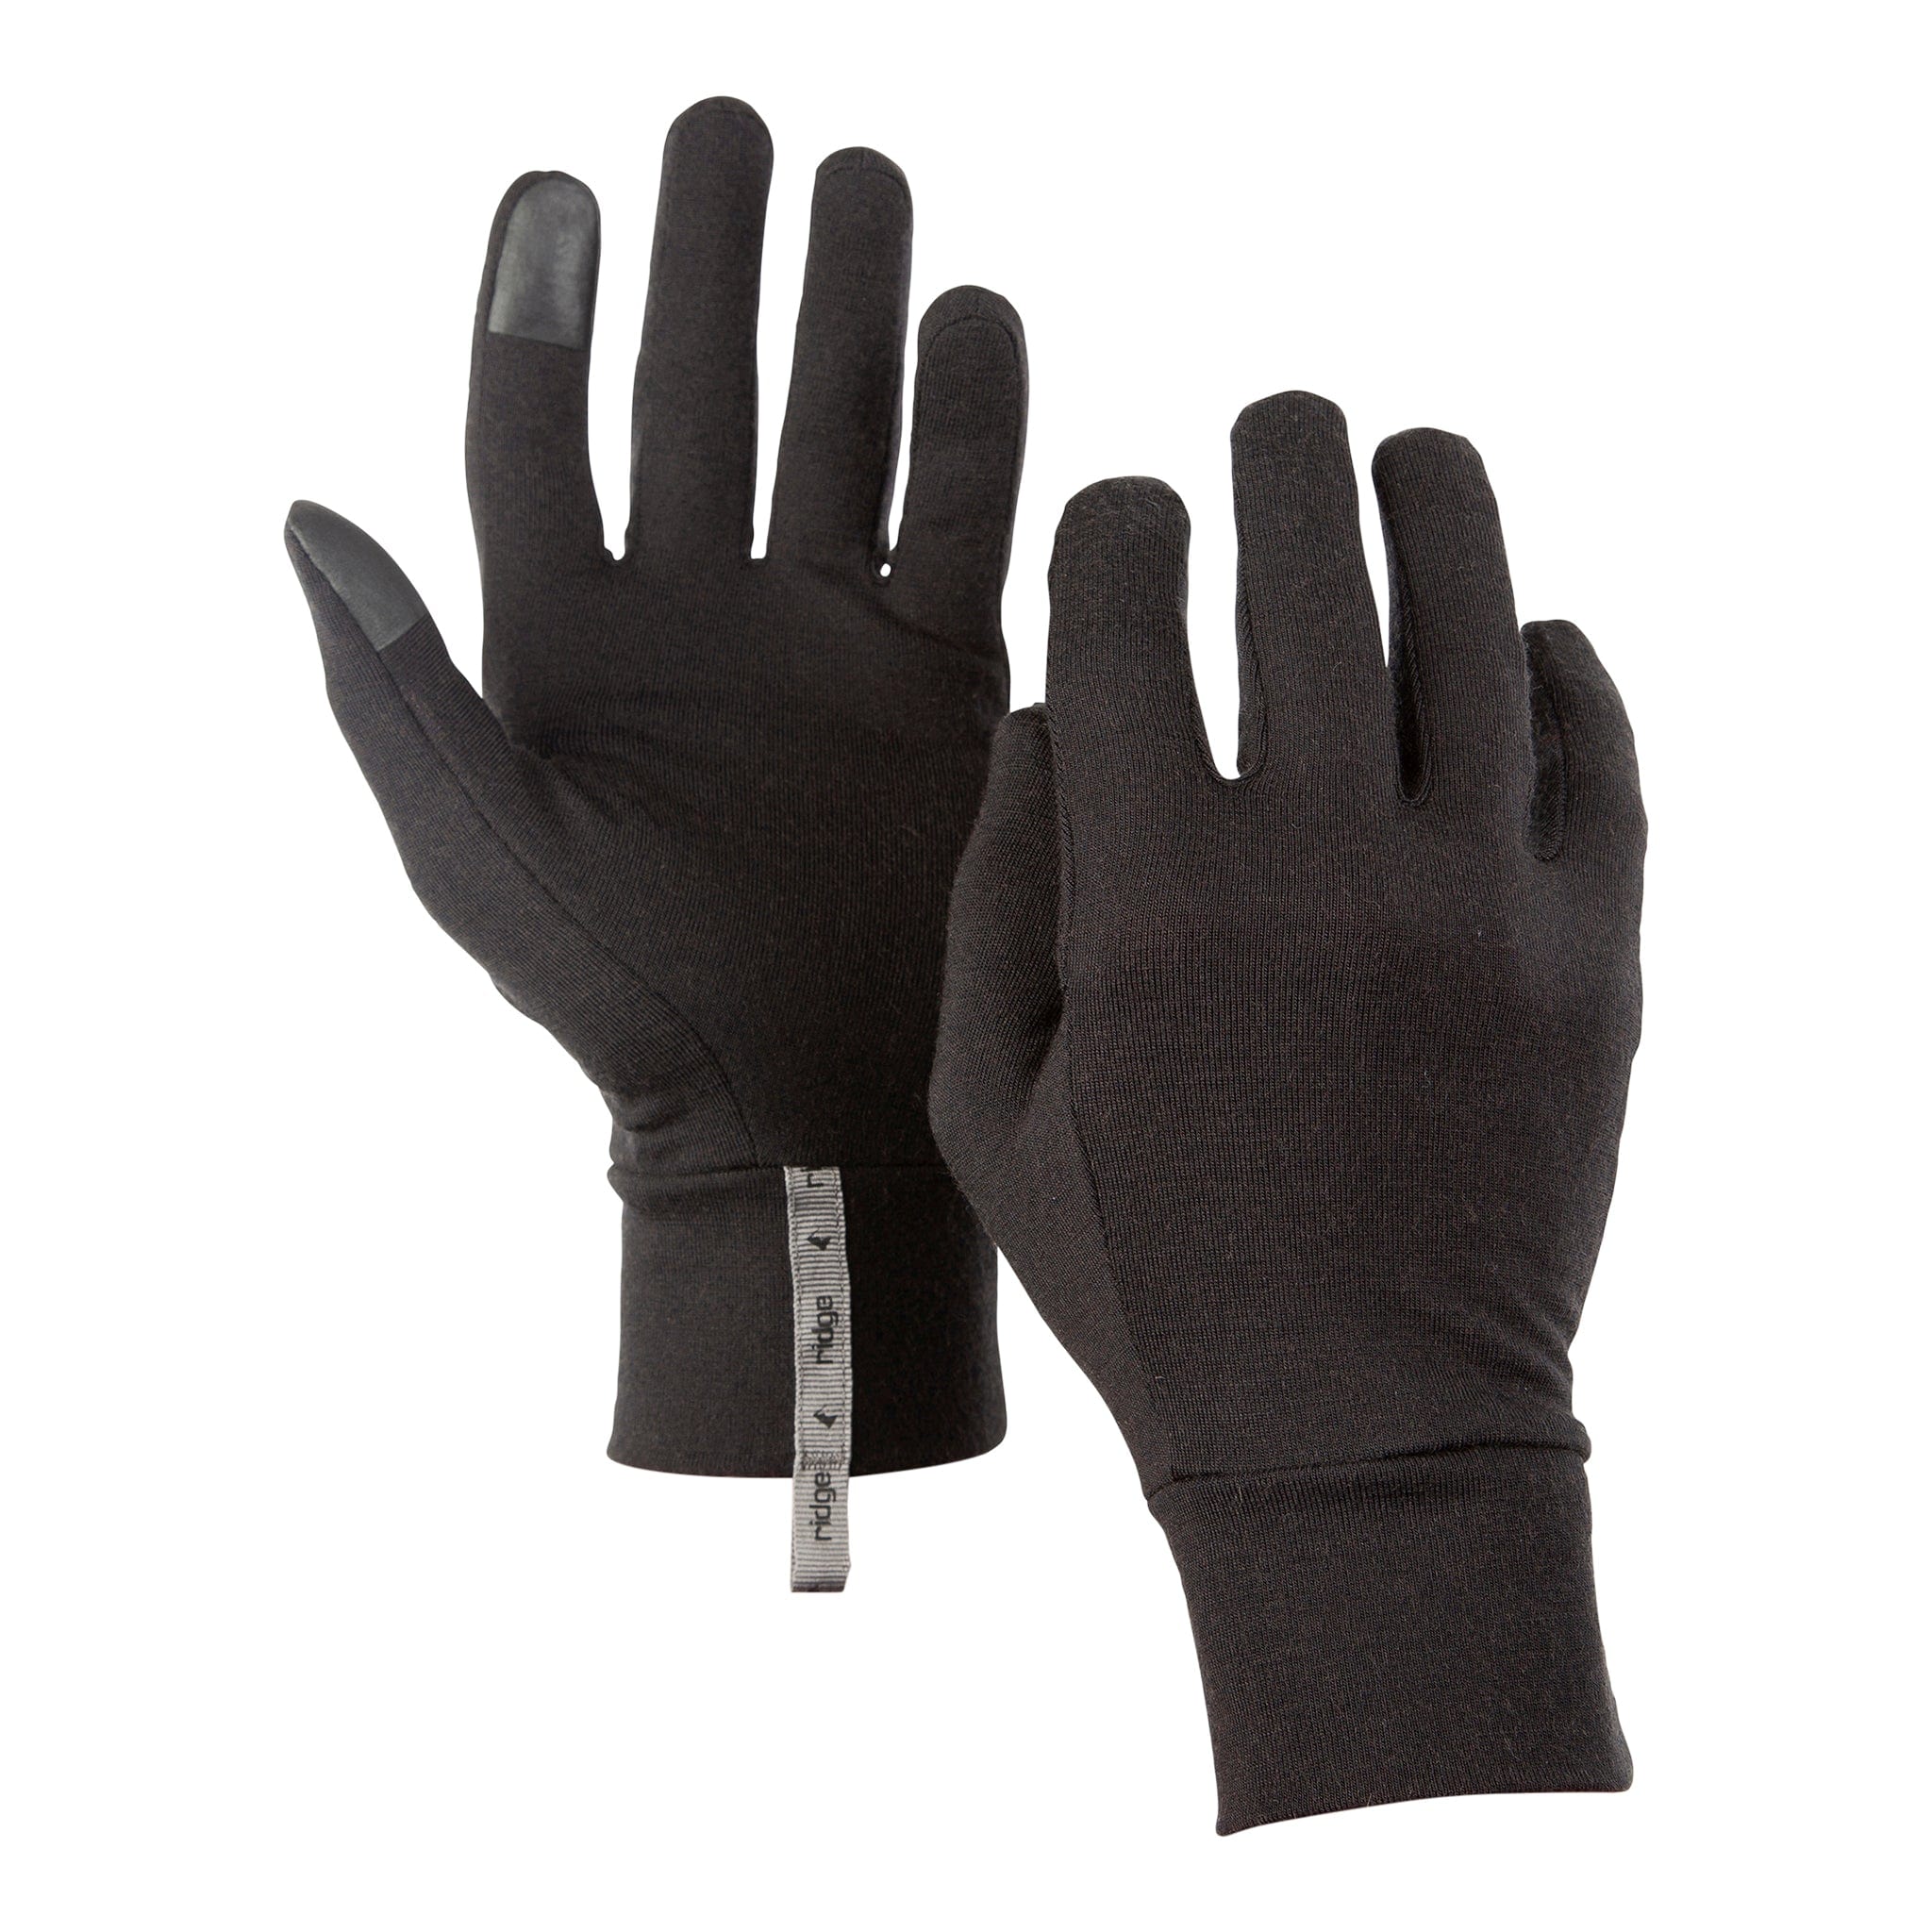 Mens Merino Wool Gloves (Color: Charcoal Grey, Size: One Size)